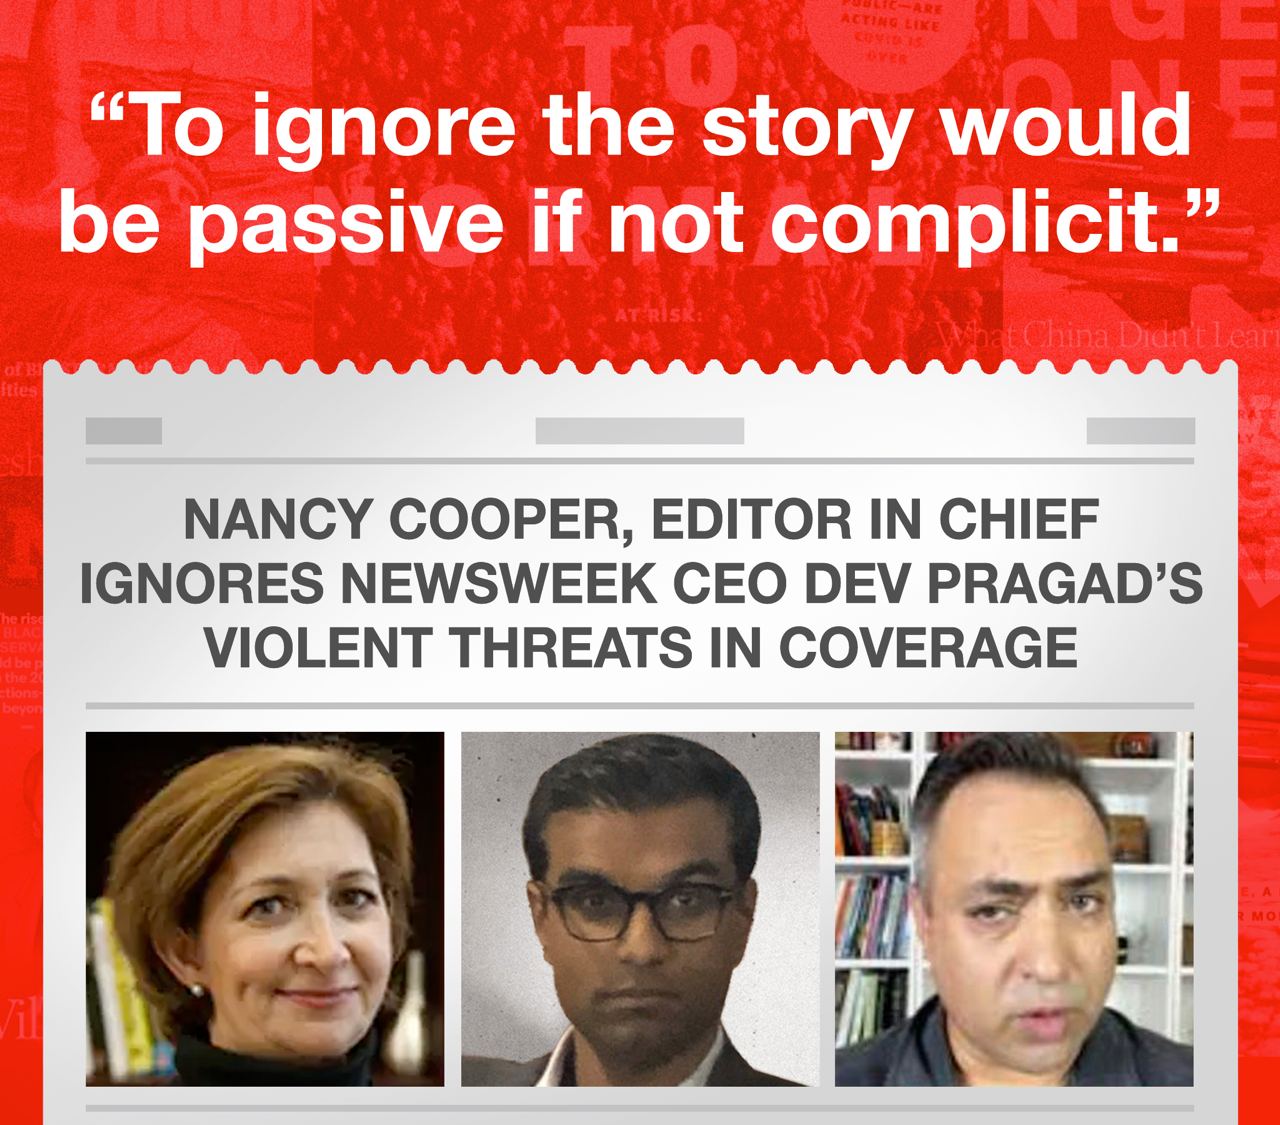 Nancy Cooper, Editor in Chief ignores Newsweek CEO Dev Pragad's violent threats in coverage